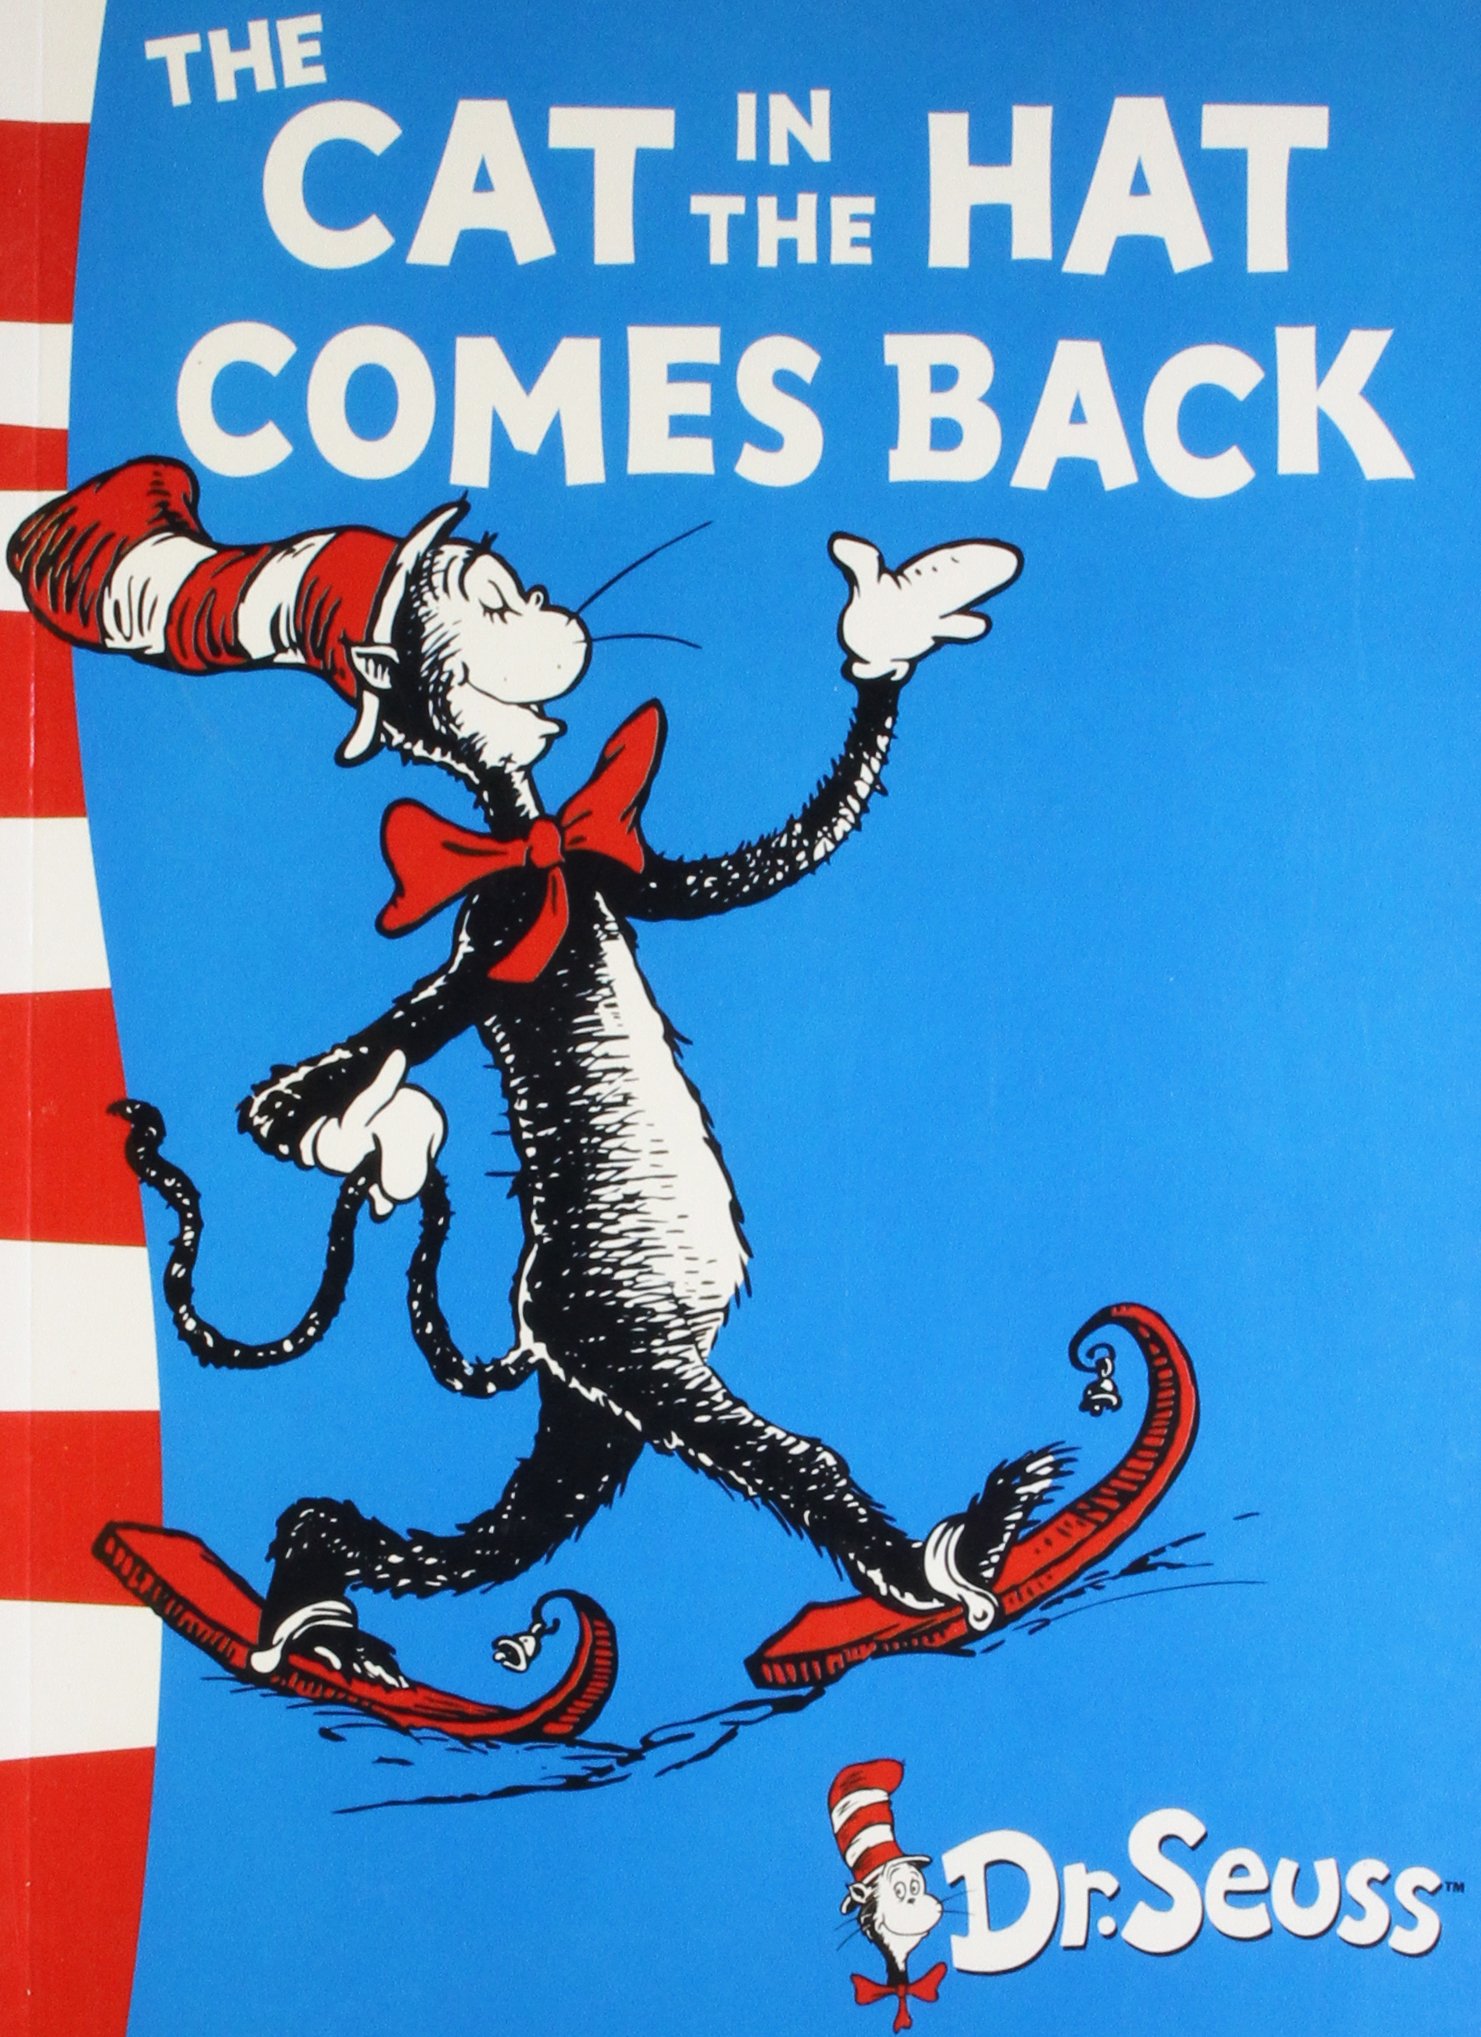 THE CAT IN THE HAT COMES BACK - Dr. Seuss